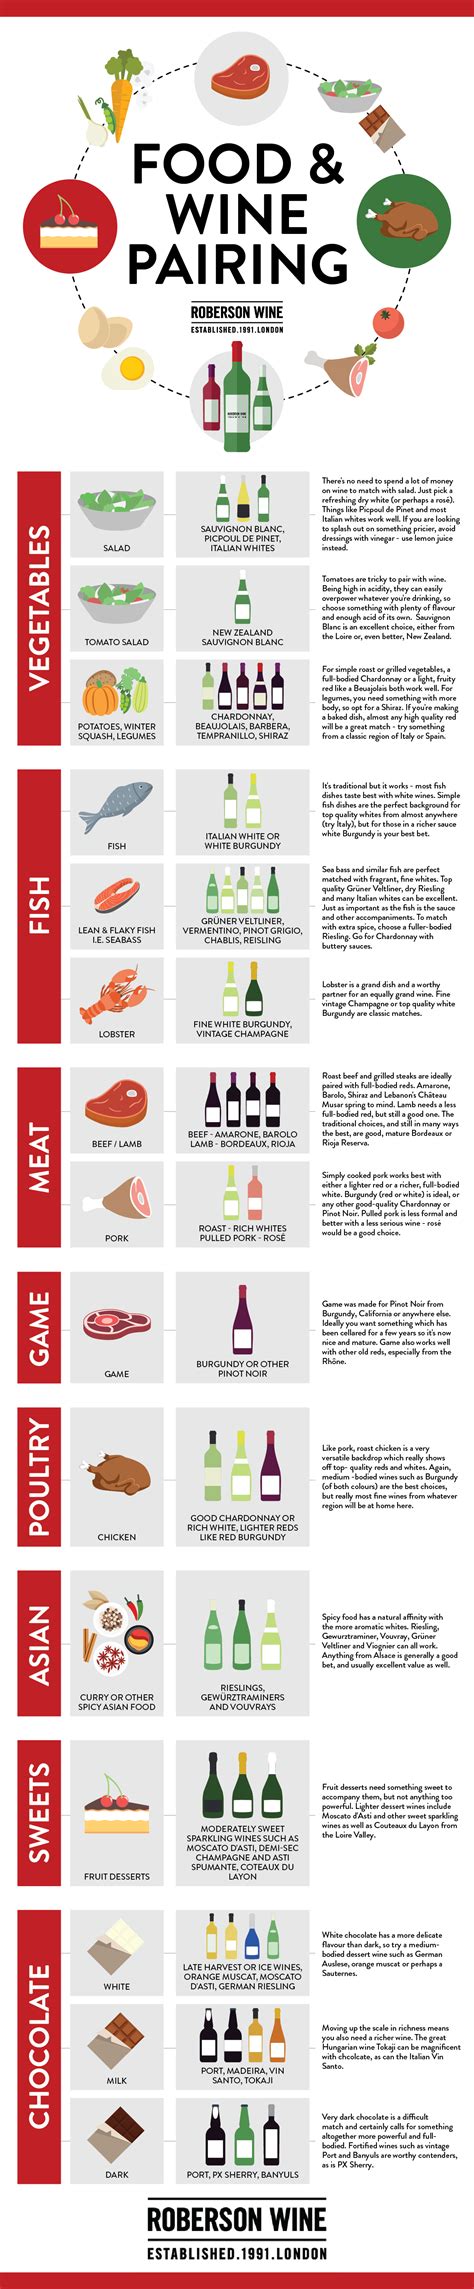 How To Pair Food With Wine Infographic The Healthy Hangover